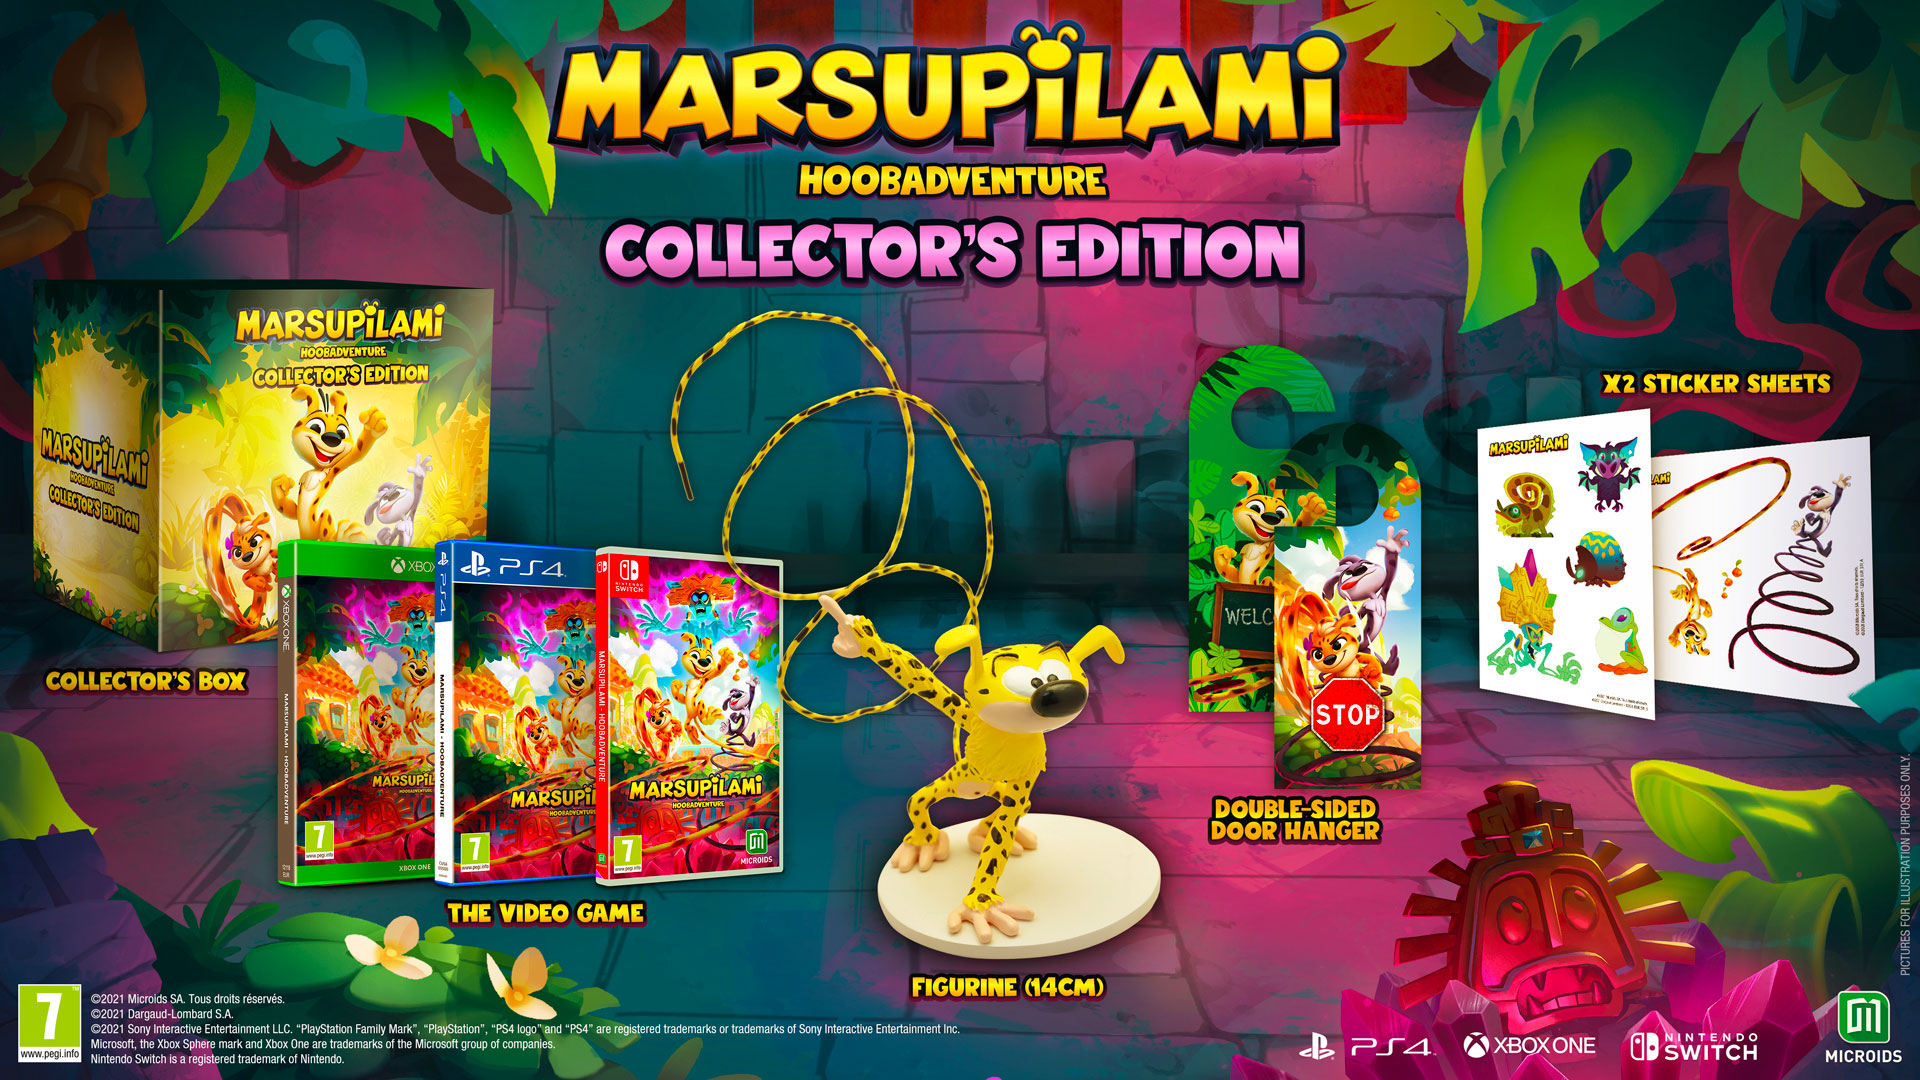 Marsupilami: Hoobadventure - Collector's Edition (PS4), Microids